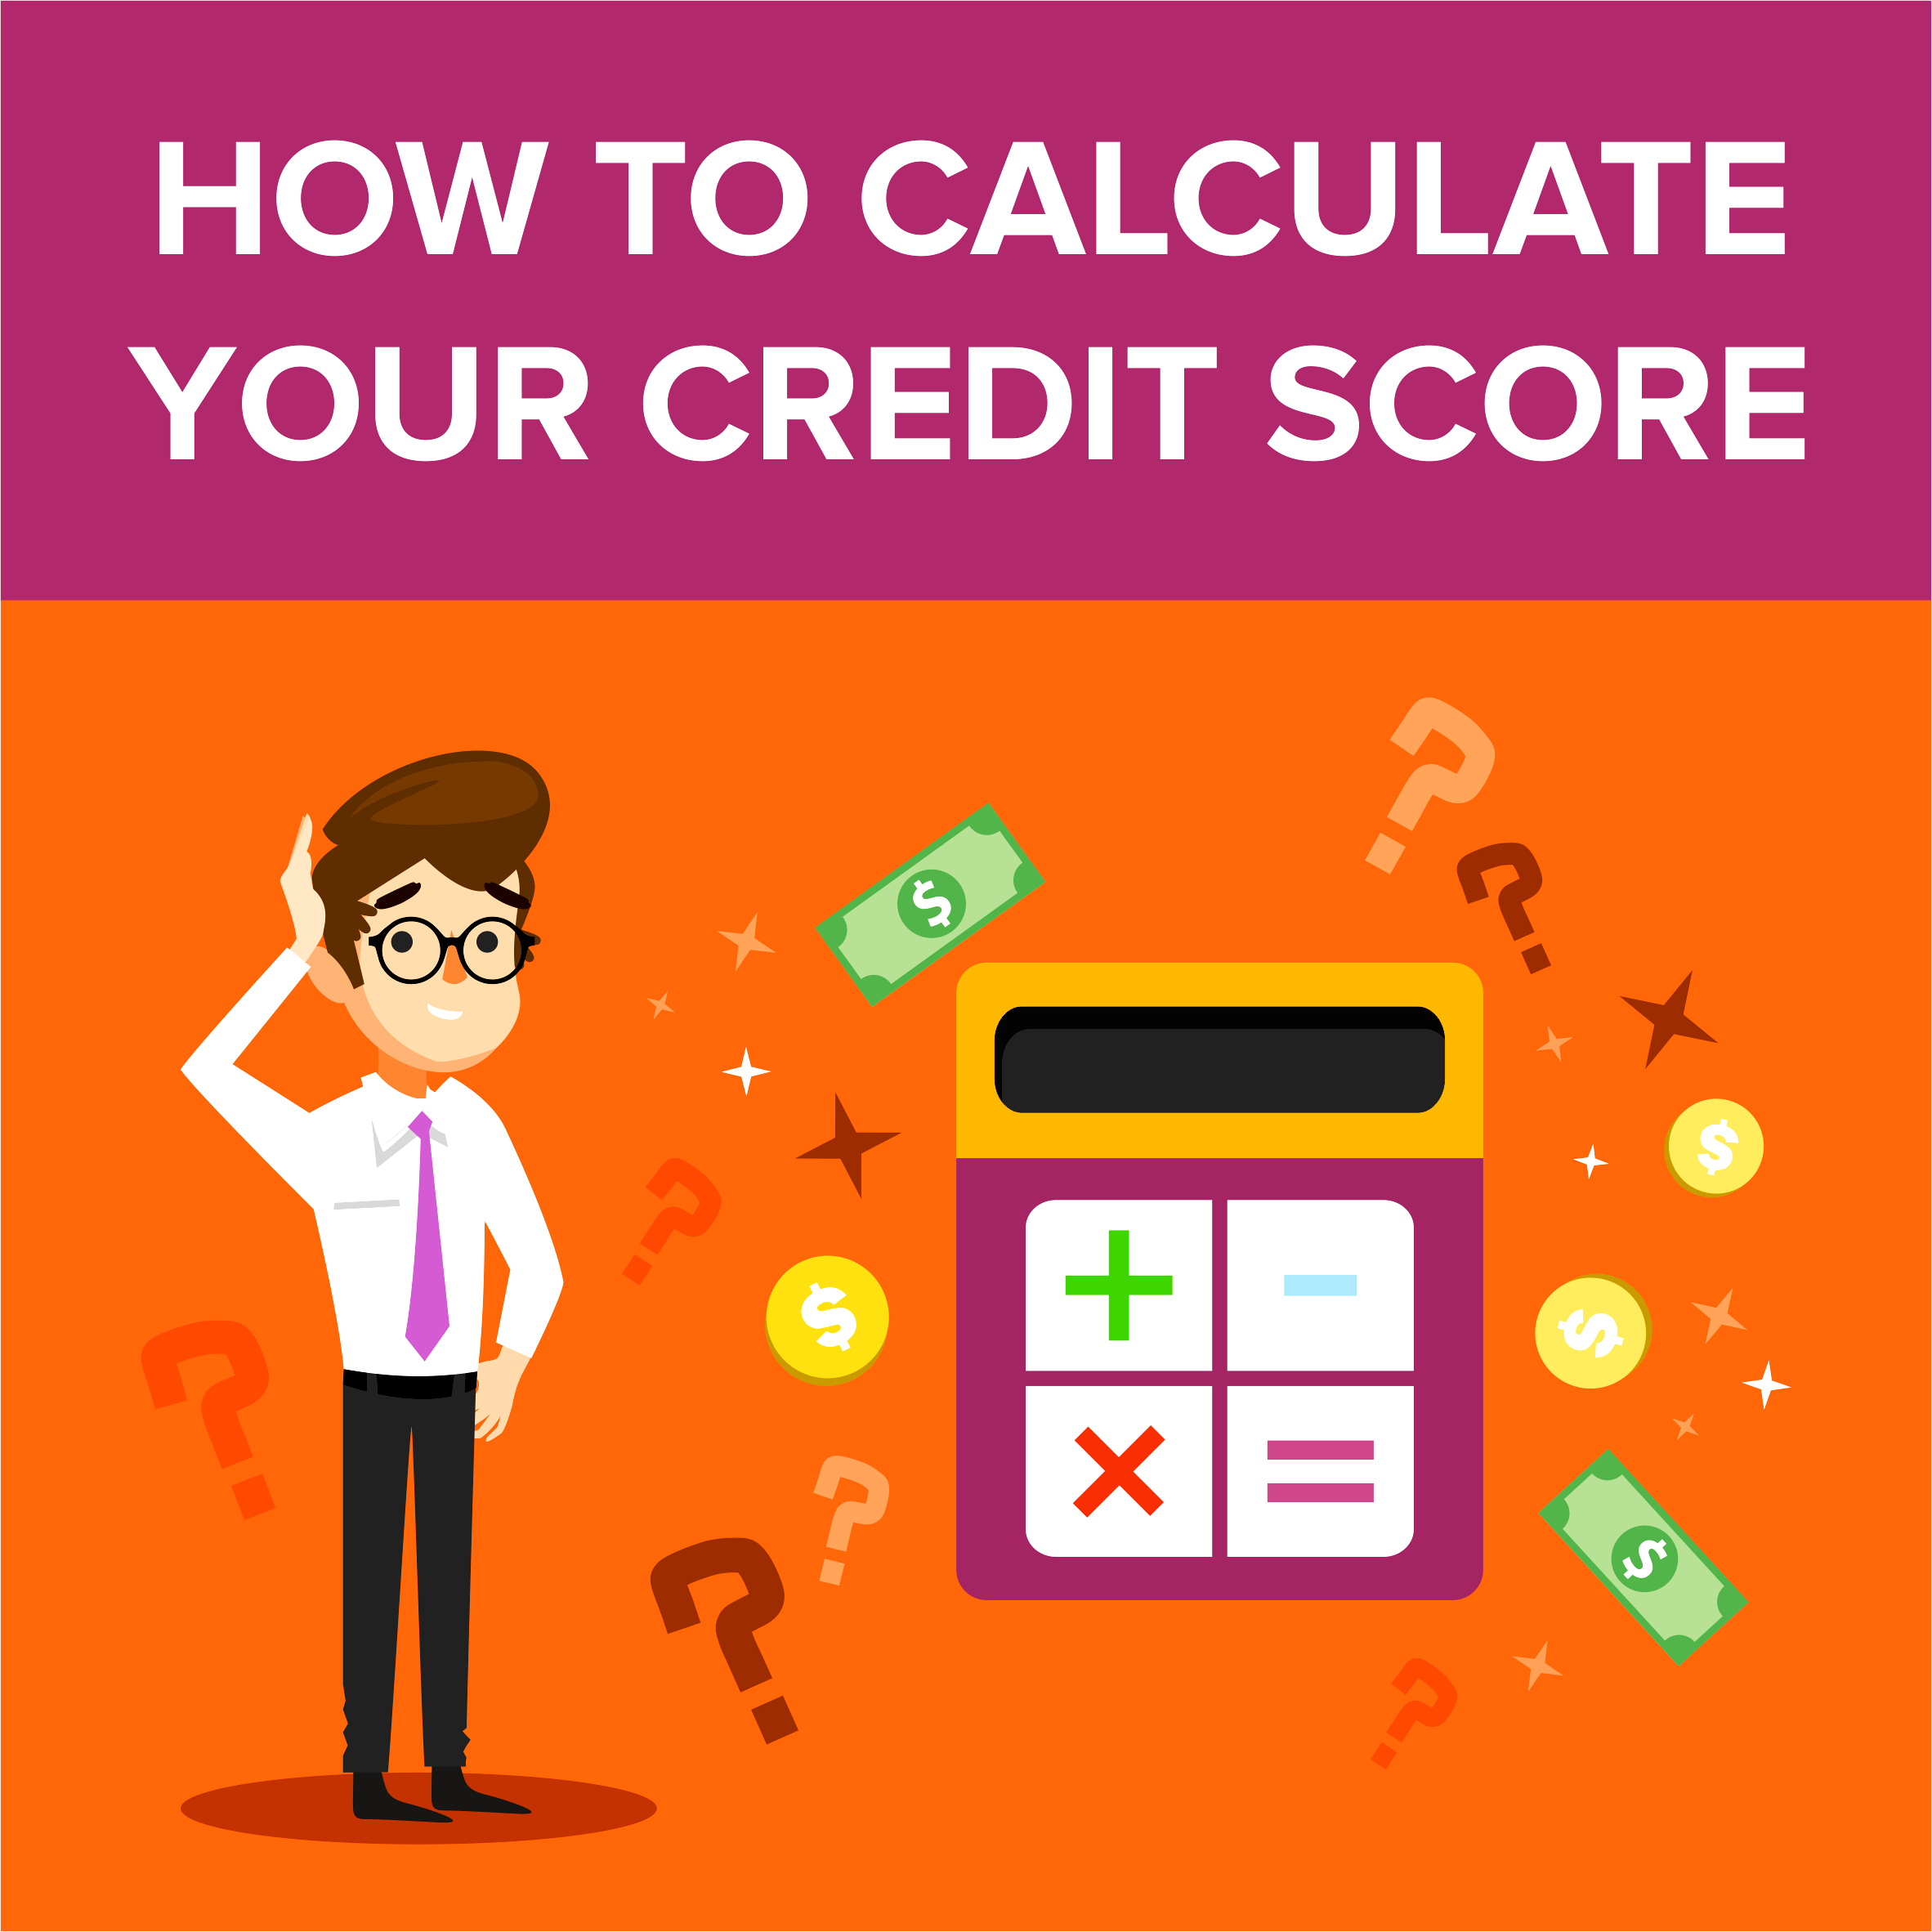 How to Calculate Your Credit Score